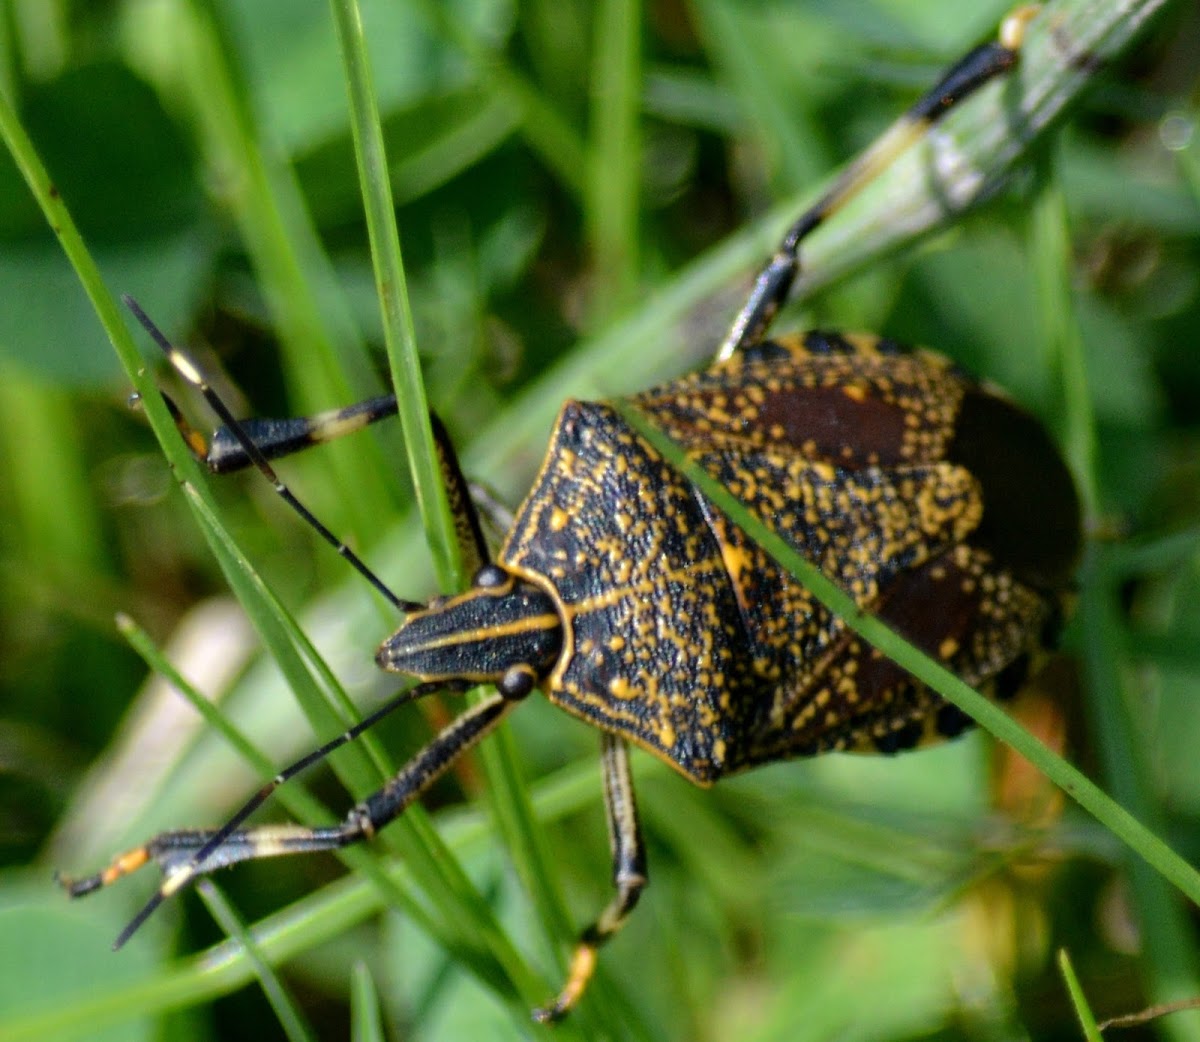 Yellow spotted Stink Bug